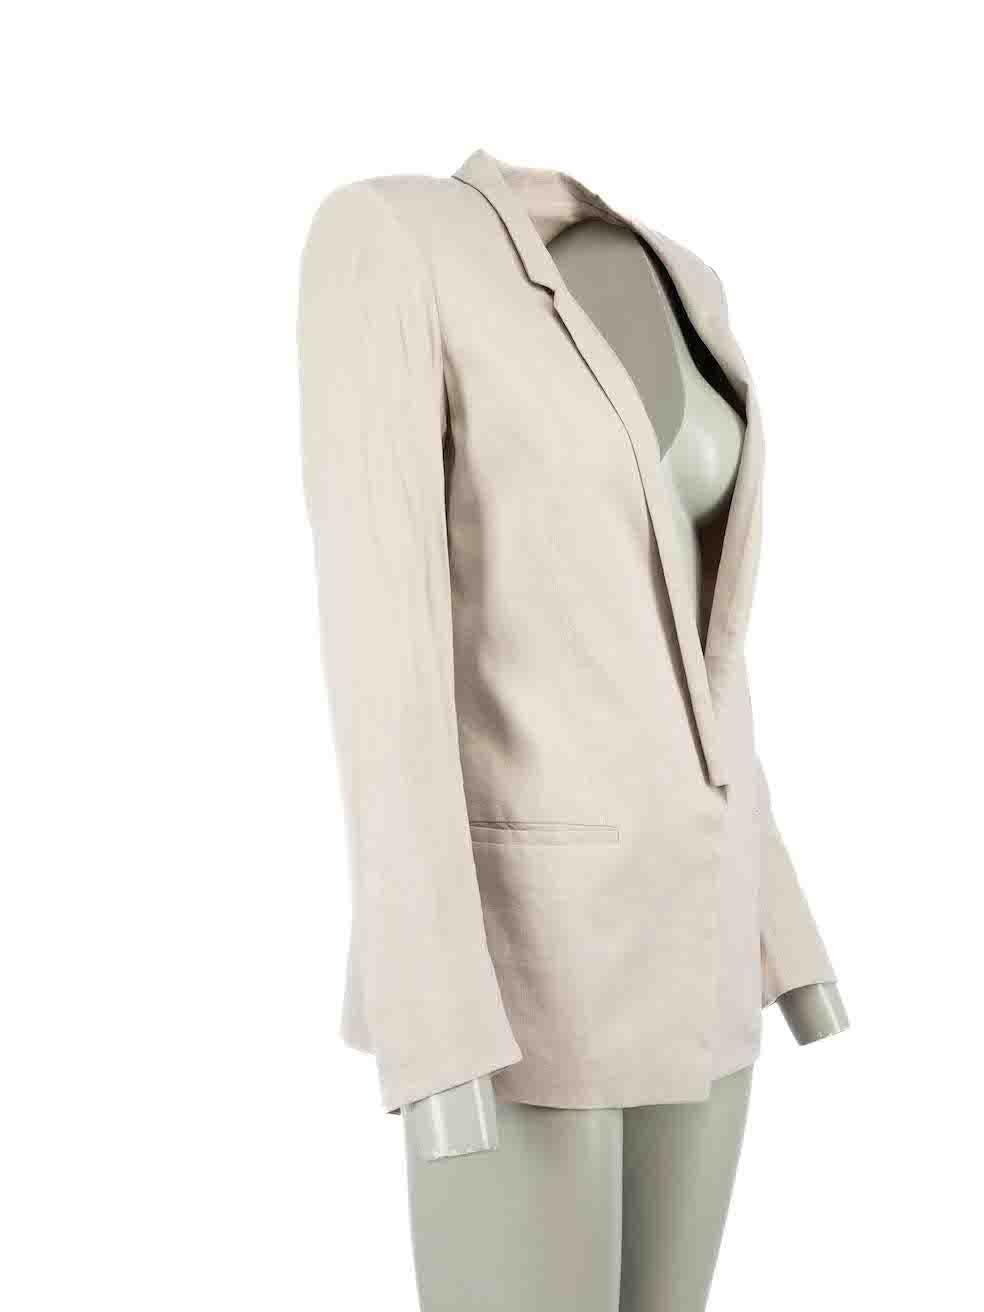 CONDITION is Very good. Minimal wear to jacket is evident. Minimal wear to fabric surface with a handful of plucks to the weave on this used Helmut Lang designer resale item.

Details 
Grey 
Linen 
Blazer
Single breasted
Buttoned cuffs
2x Front side